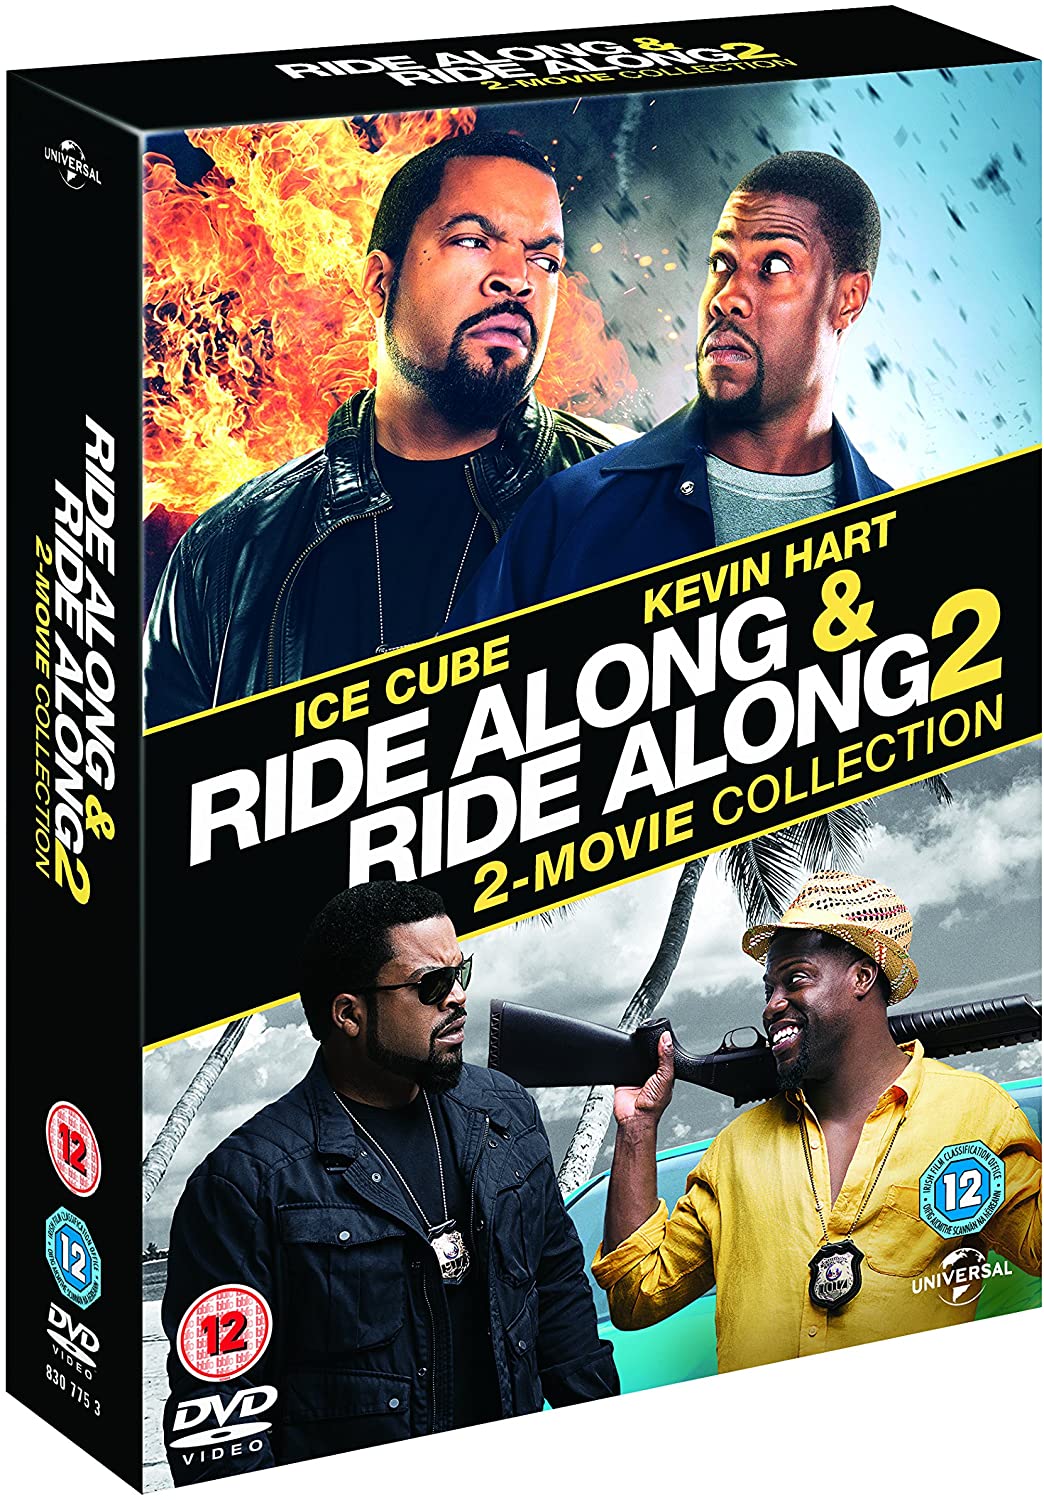 Ride Along 2 Film Collection [2014] (DVD)